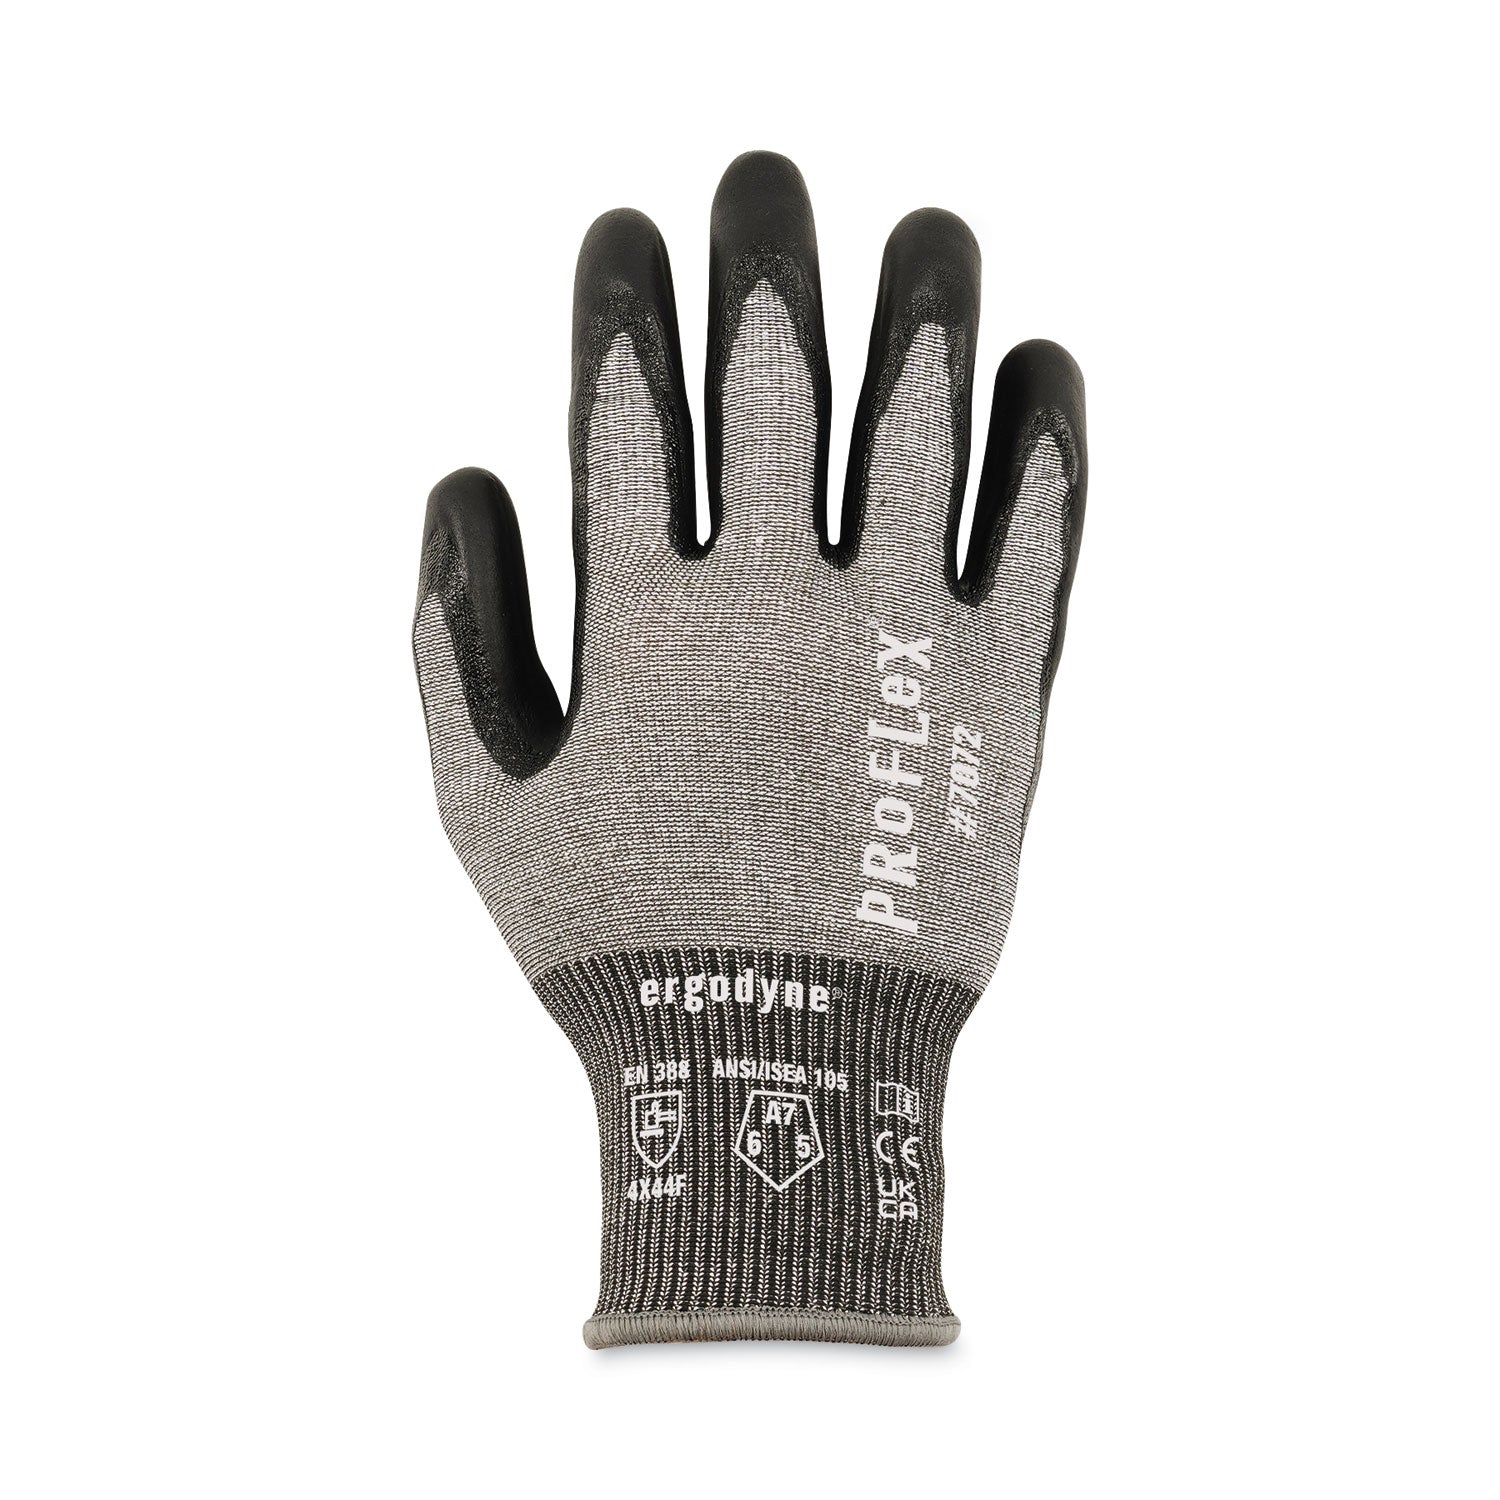 proflex-7072-ansi-a7-nitrile-coated-cr-gloves-gray-medium-12-pairs-pack-ships-in-1-3-business-days_ego10303 - 4